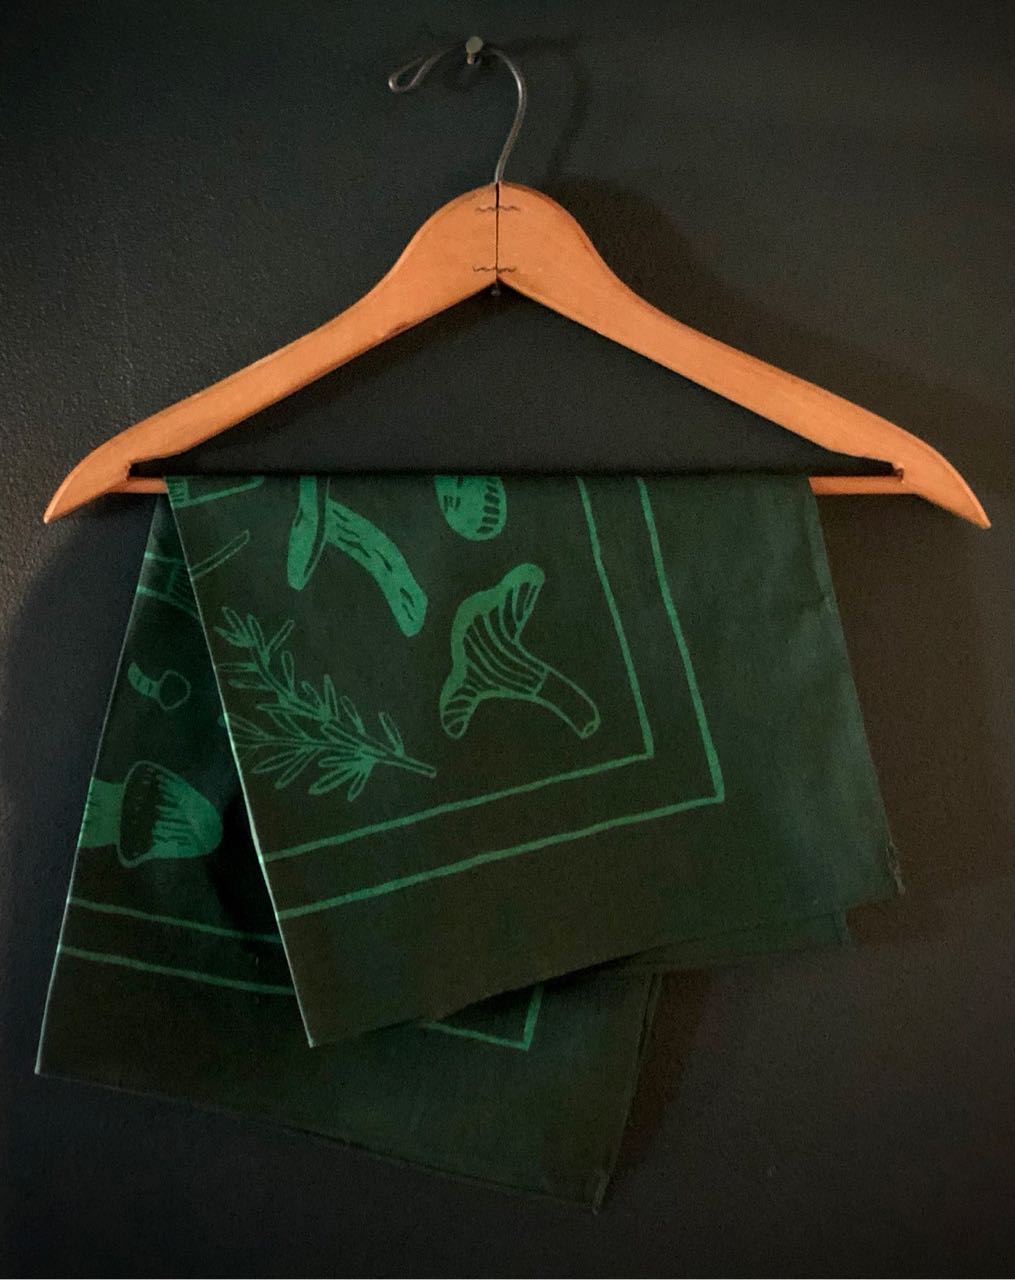 Green and green evangeline bandana folded and hanging on a hanger. Bandana has illustrations of mushrooms and lavender.